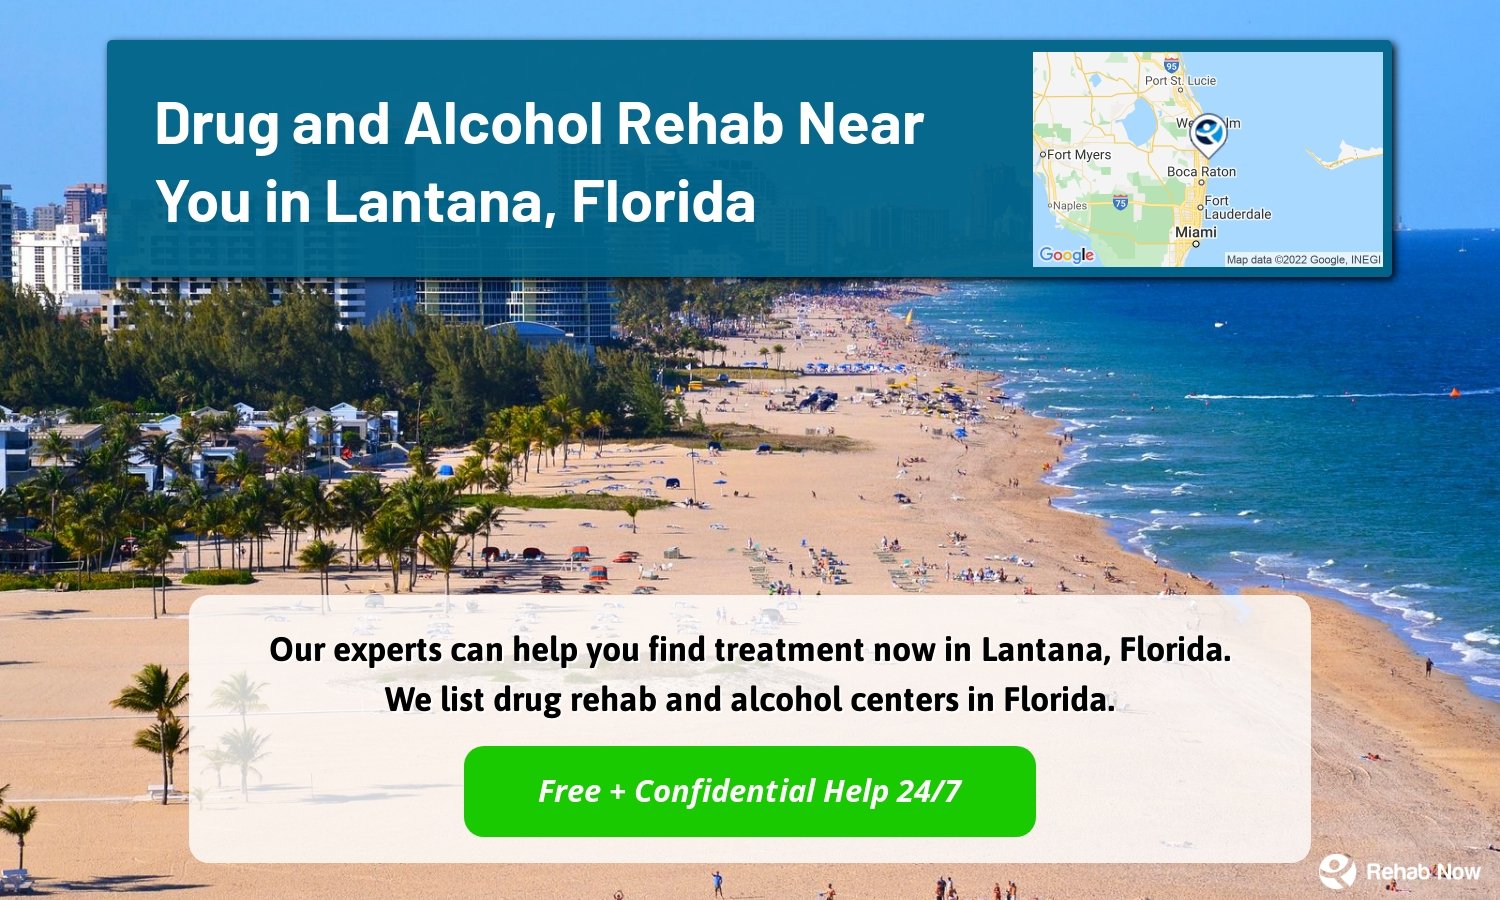 Our experts can help you find treatment now in Lantana, Florida. We list drug rehab and alcohol centers in Florida.